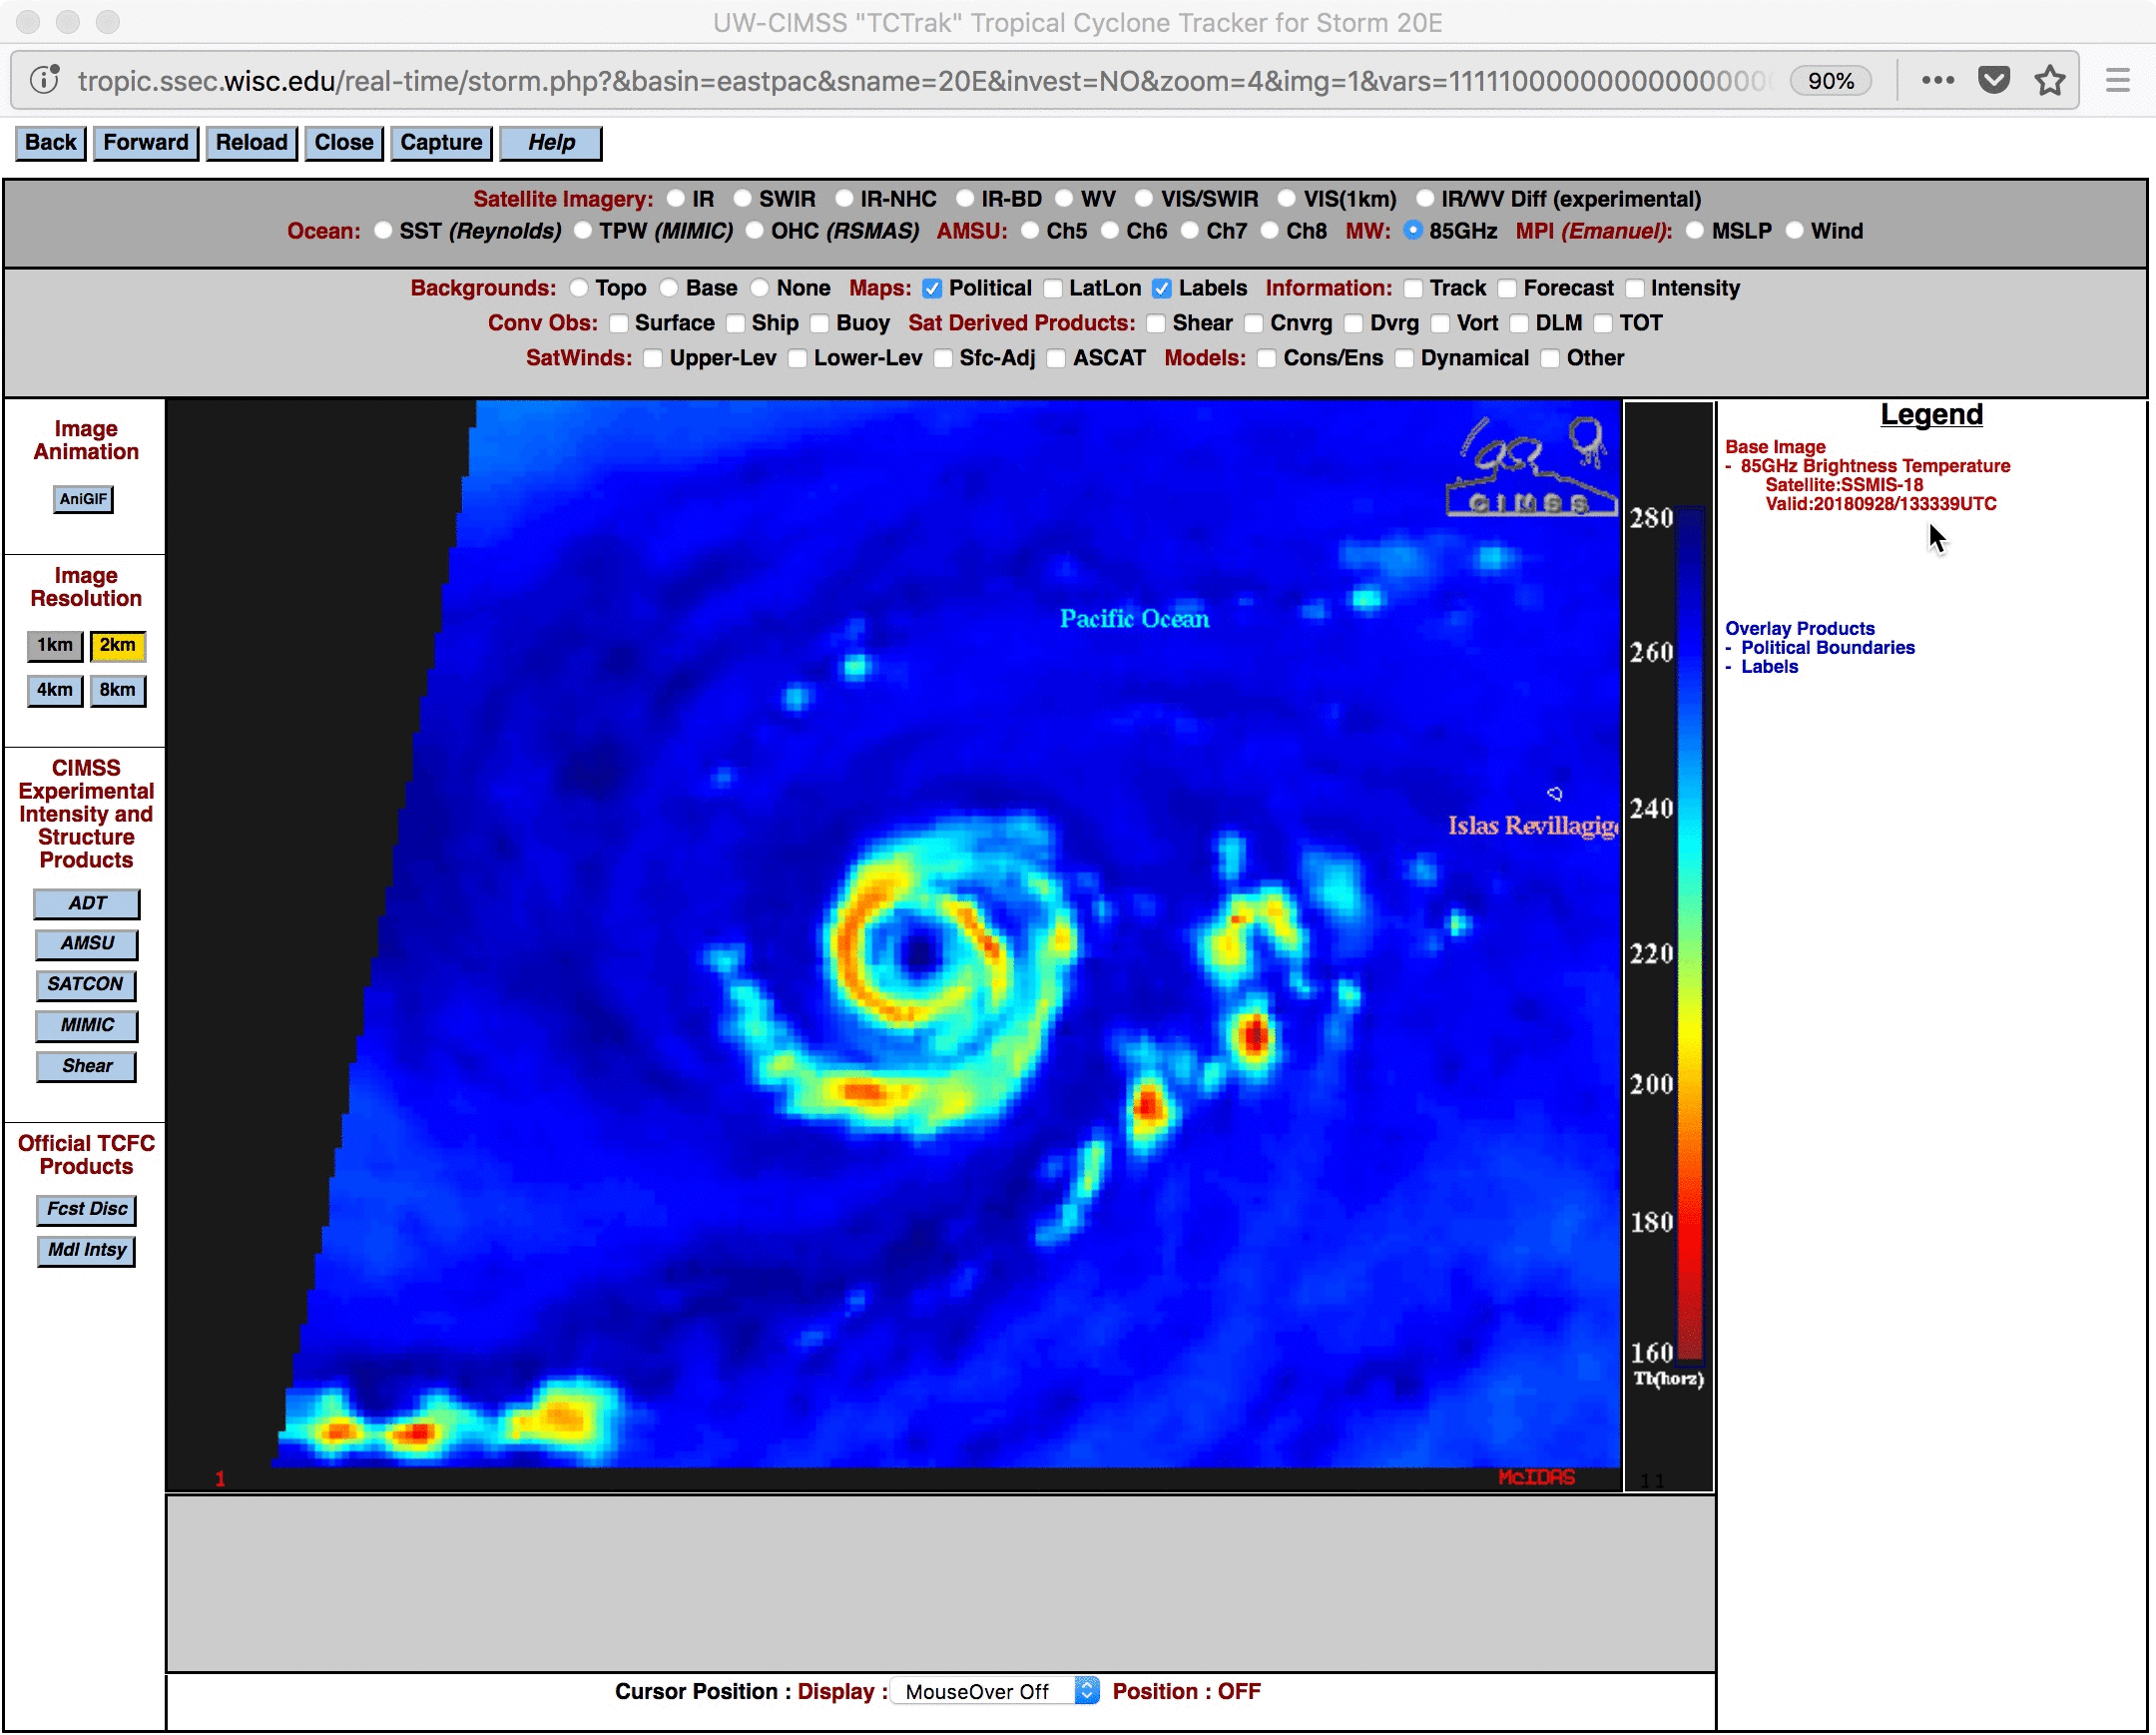 DMSP-18 SSMIS Microwave (85 GHz) and GOES-15 Infrared Window (10.7 µm) images [click to enlarge]